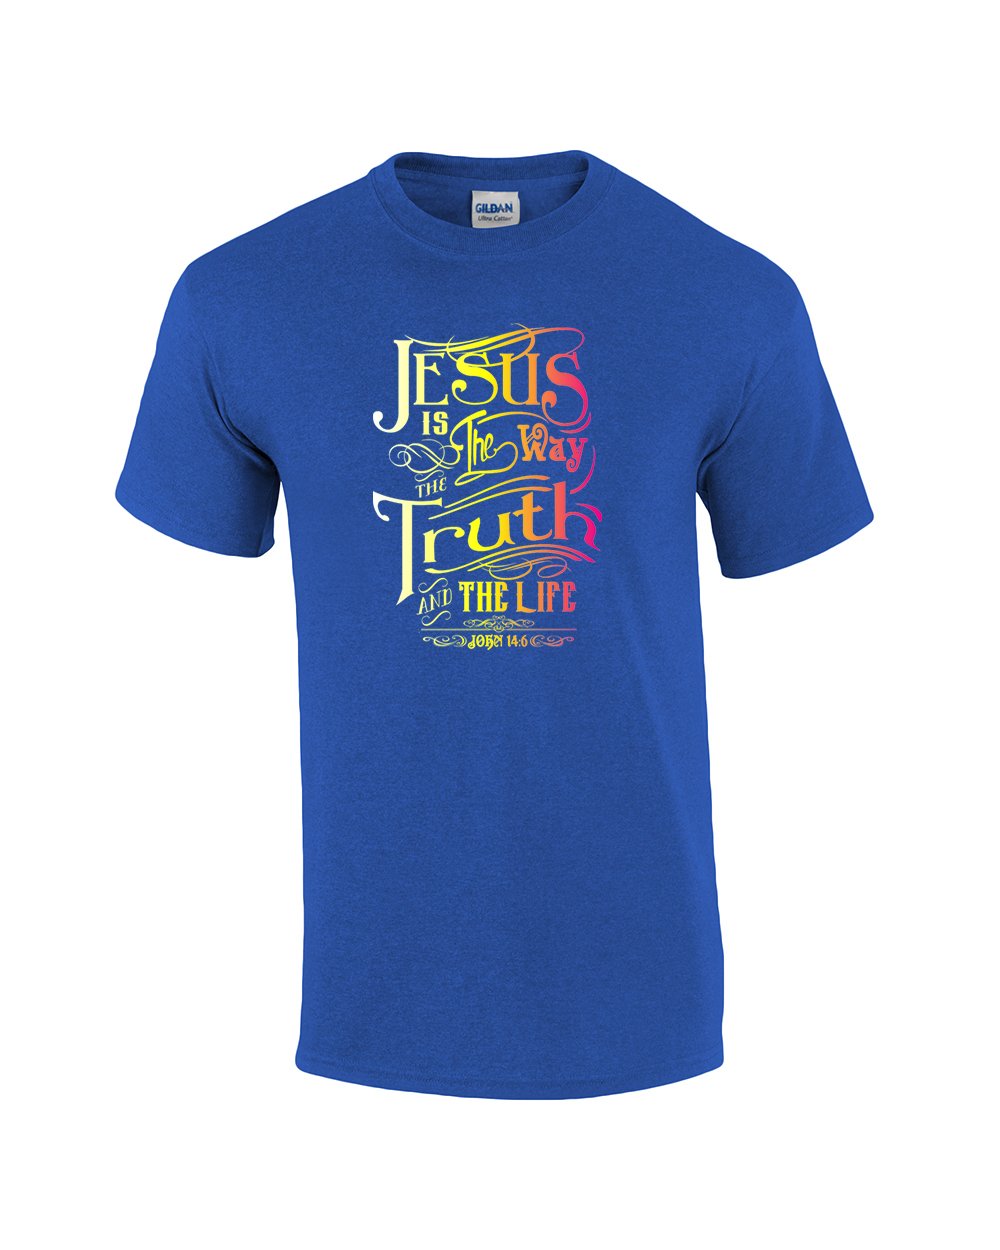 Jesus is The Way Adult Christian Tee Shirt antiqueroyal